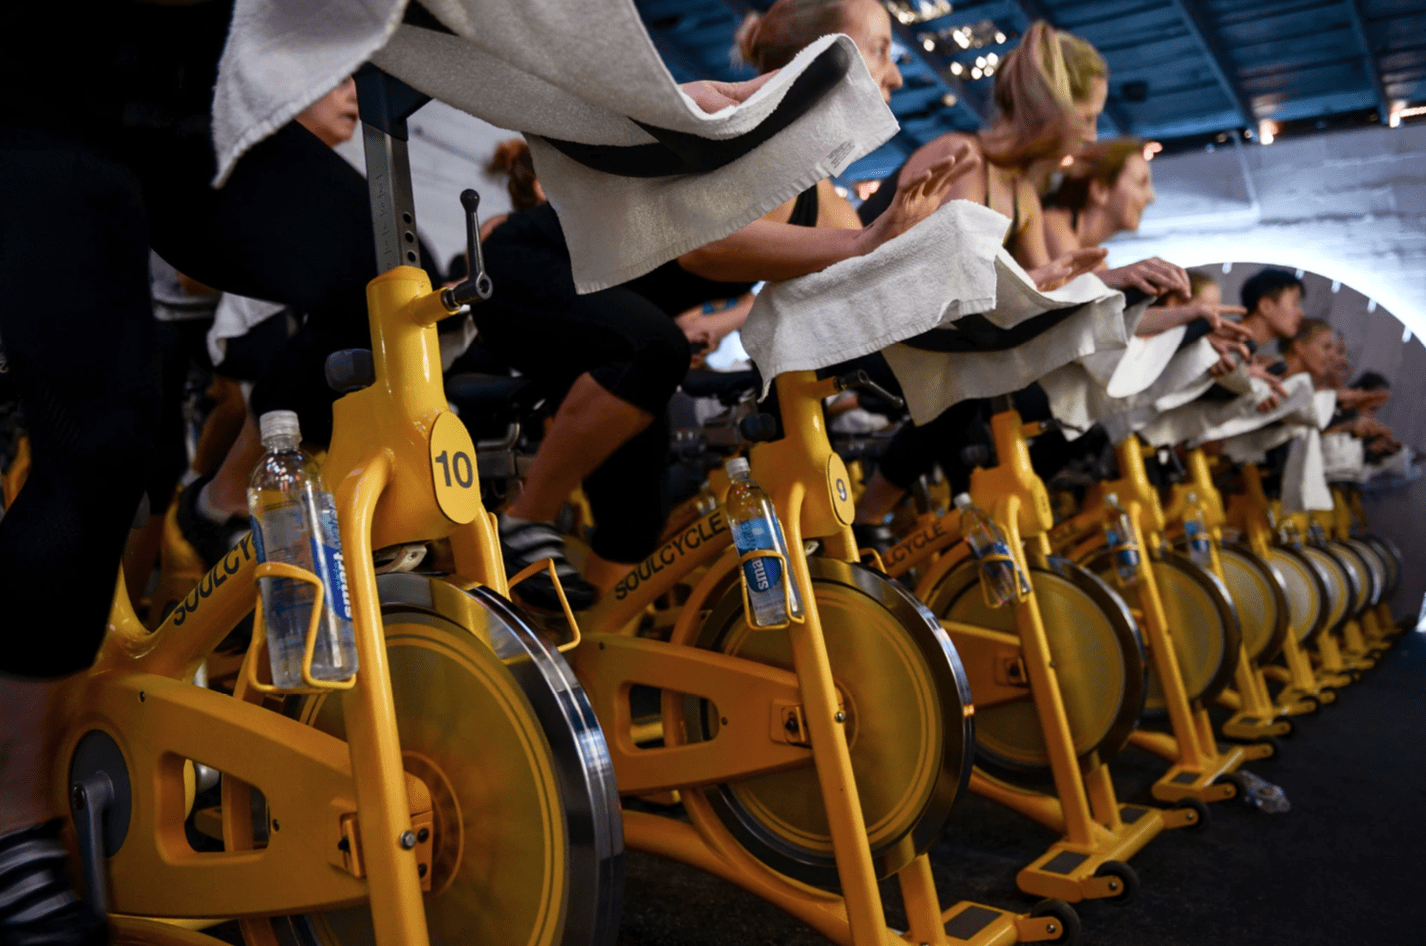 How many calories do you burn in a spin class